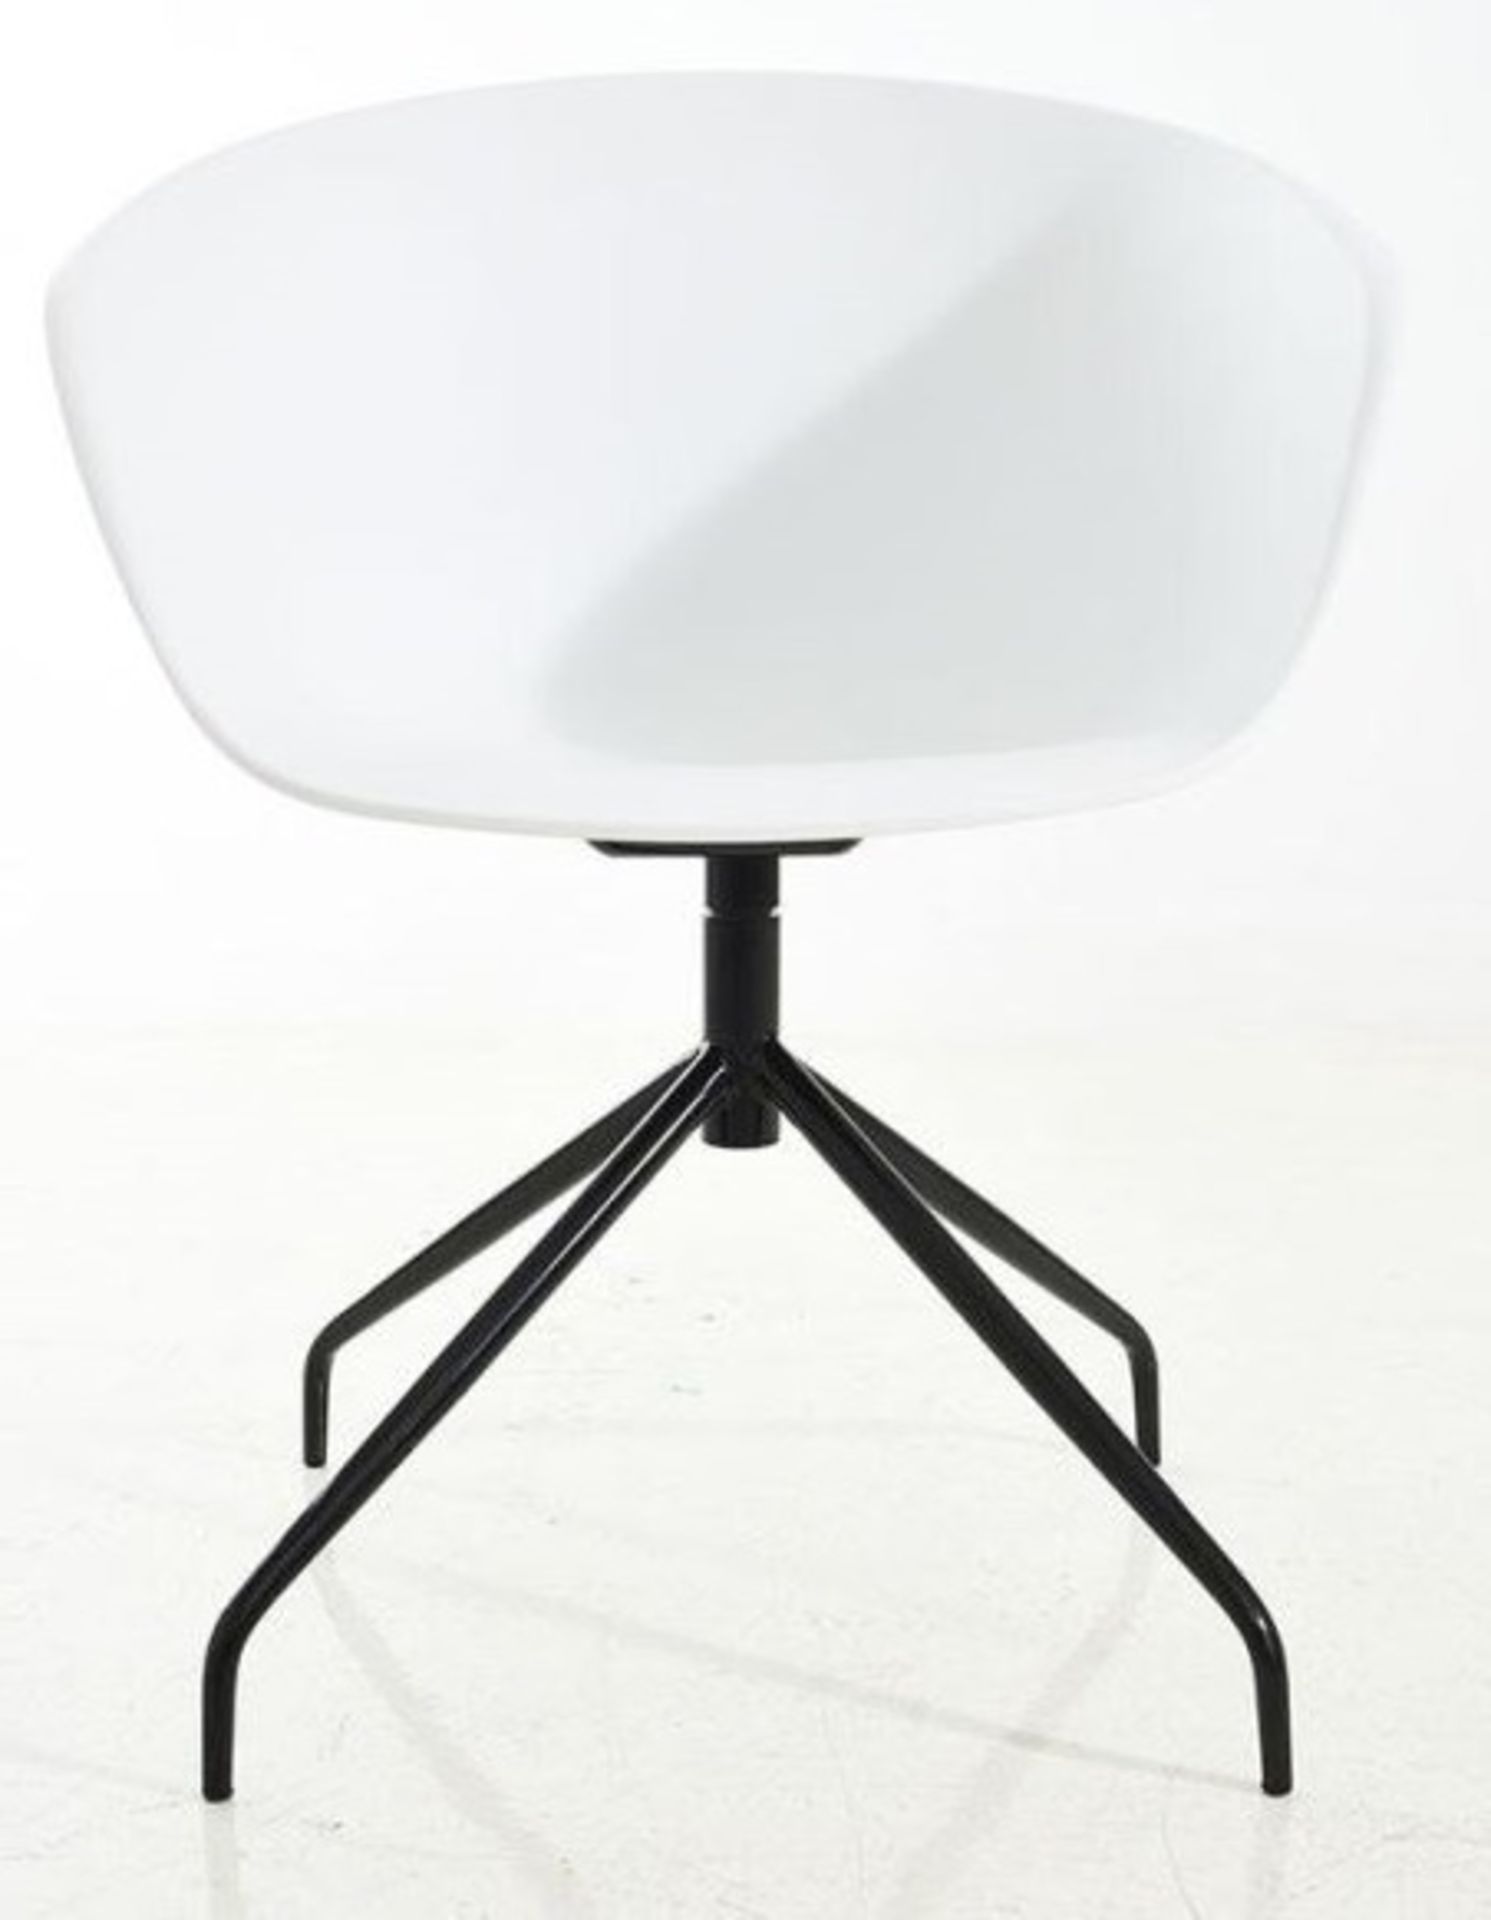 A Set Of 4 x Elegant 'NOVA' Swivel Dining Chairs With White Curved Seats And Black Metal Bases - - Image 2 of 4